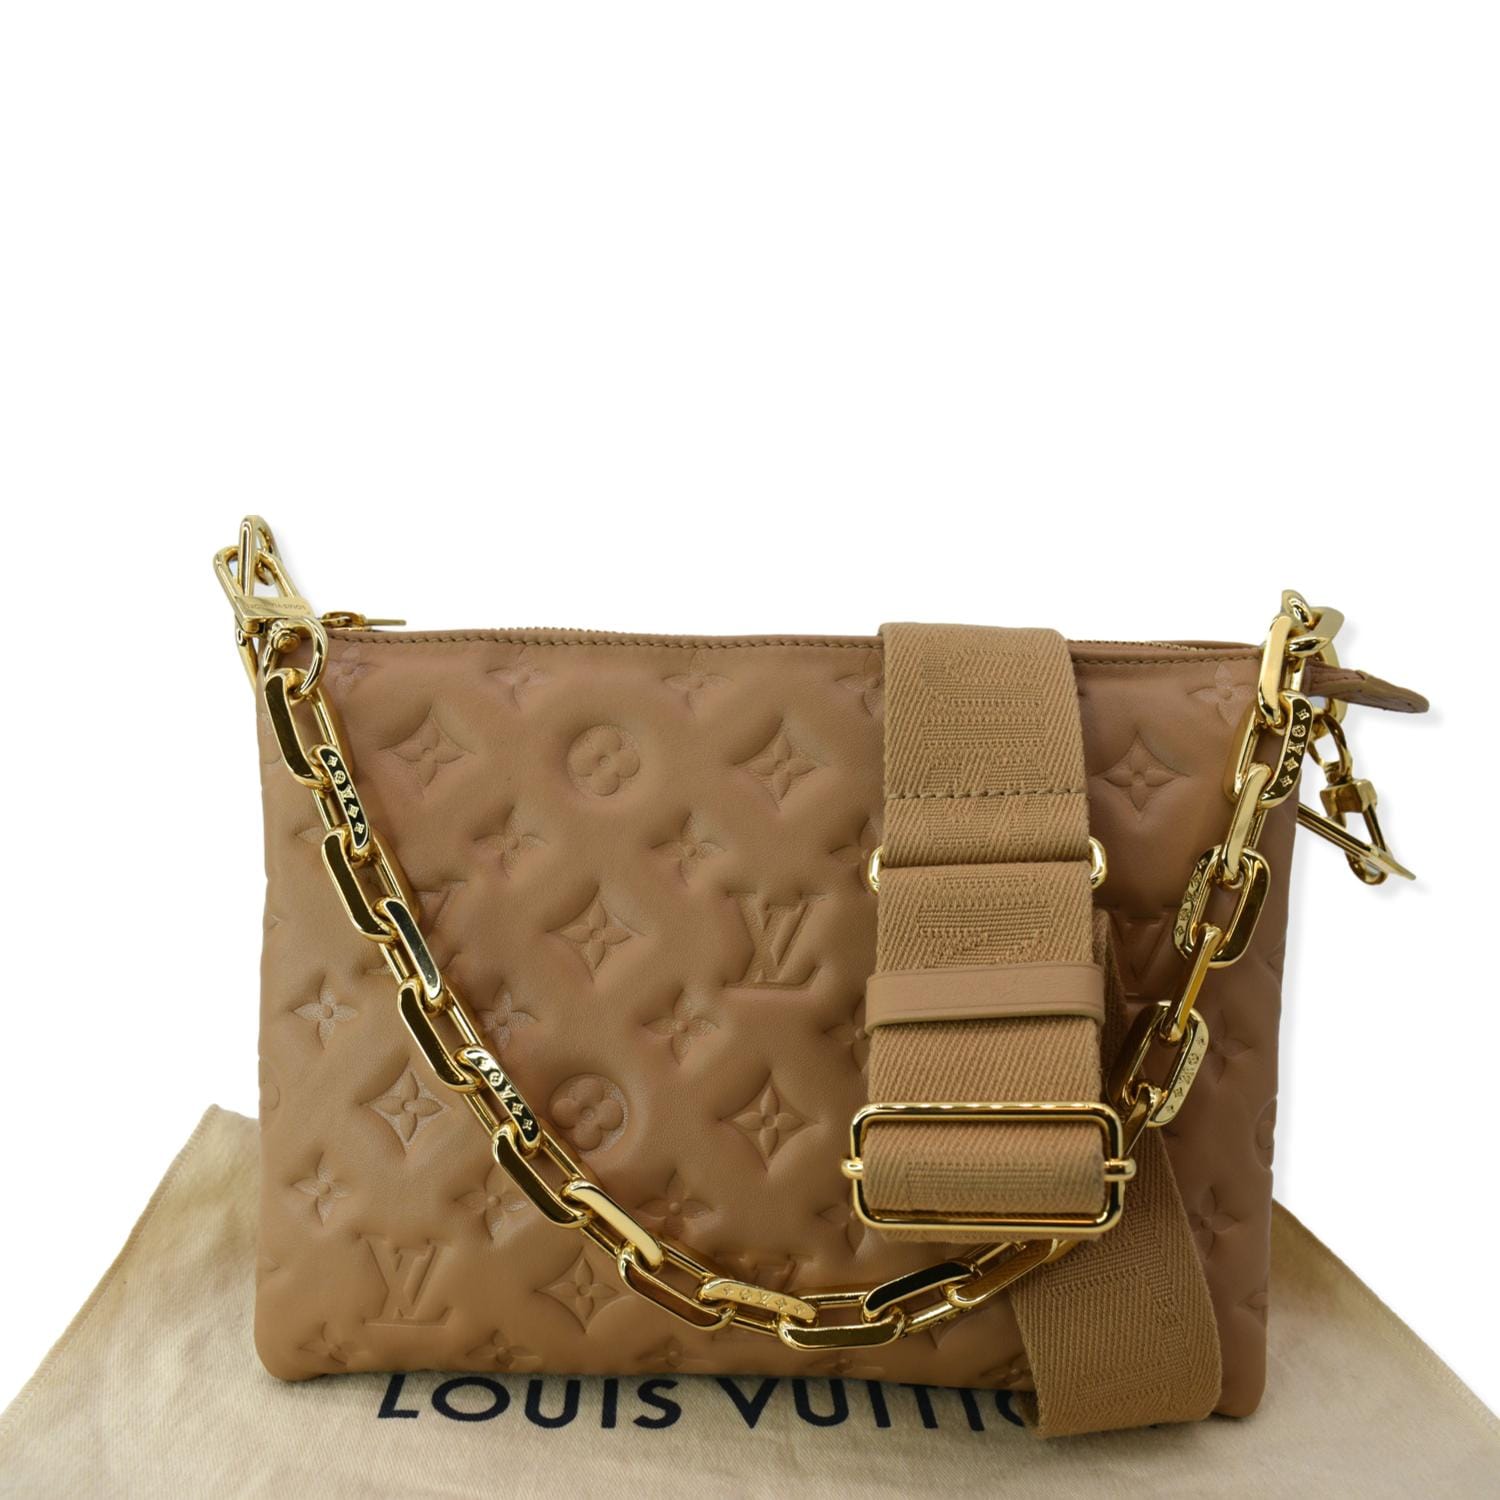 LOUIS VUITTON Coussin PM Gold Monogram Embossed Leather Shoulder